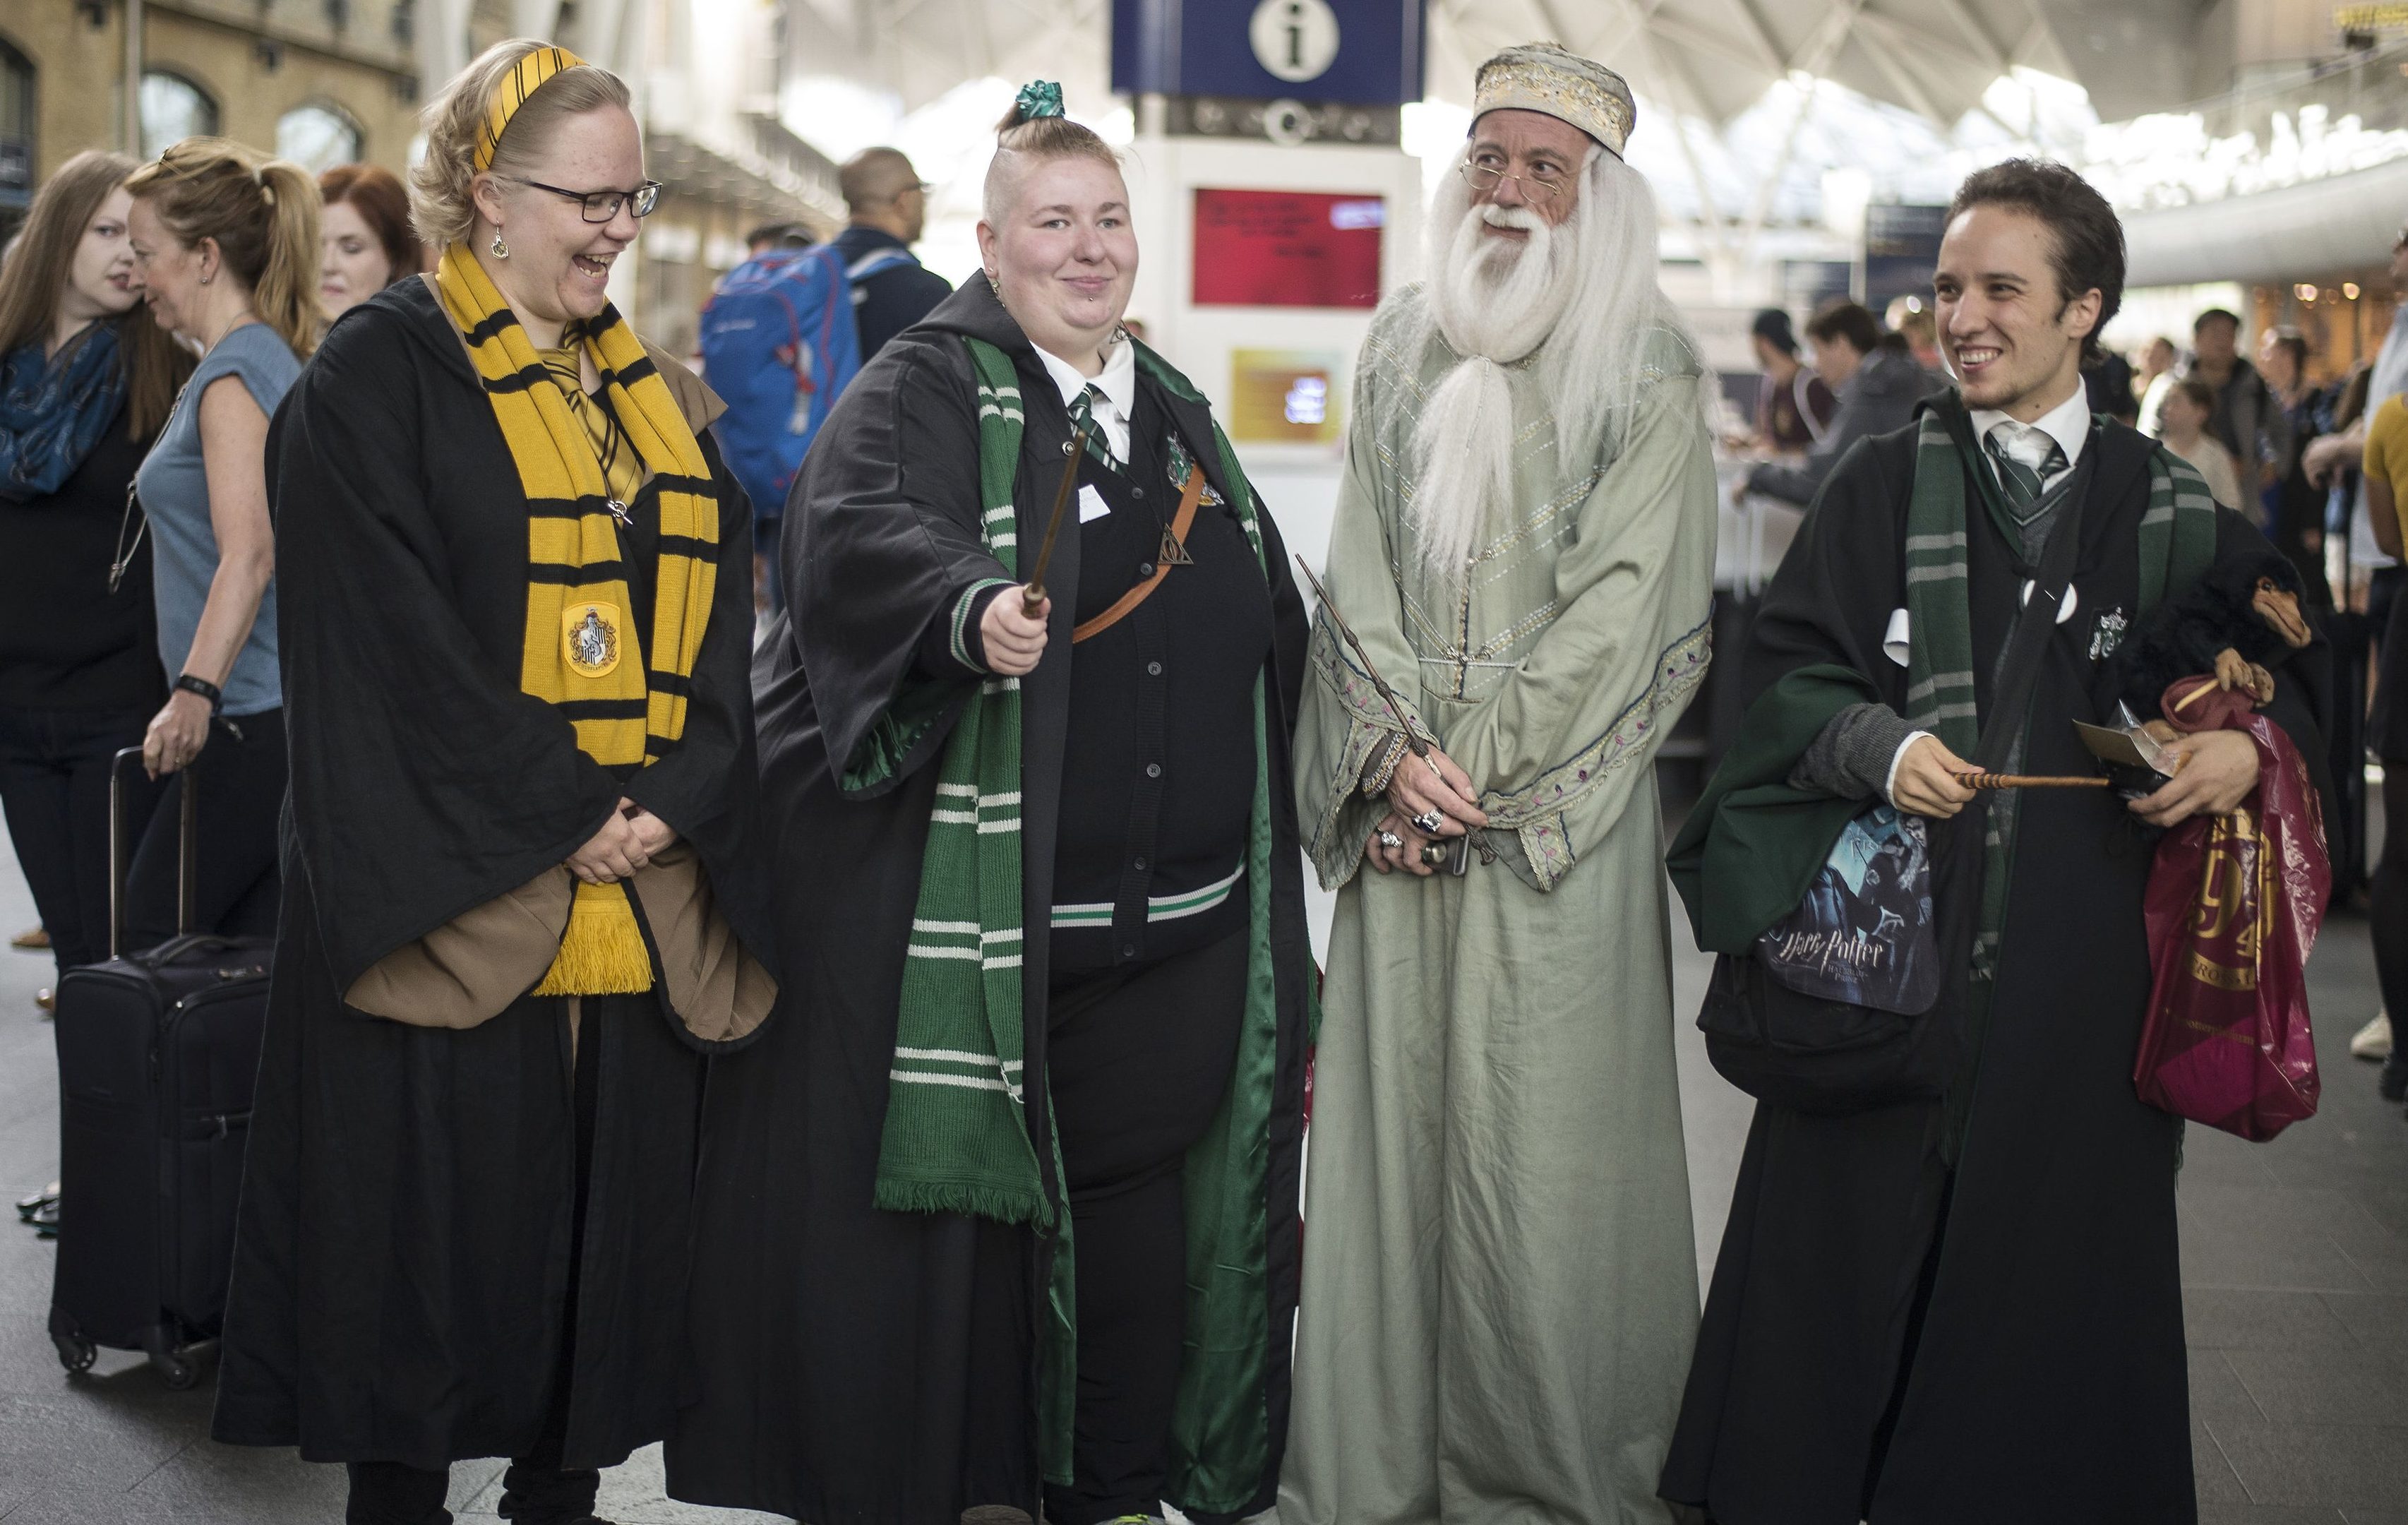 Harry Potter fans at King's Cross Station (Lauren Hurley/PA Wire)